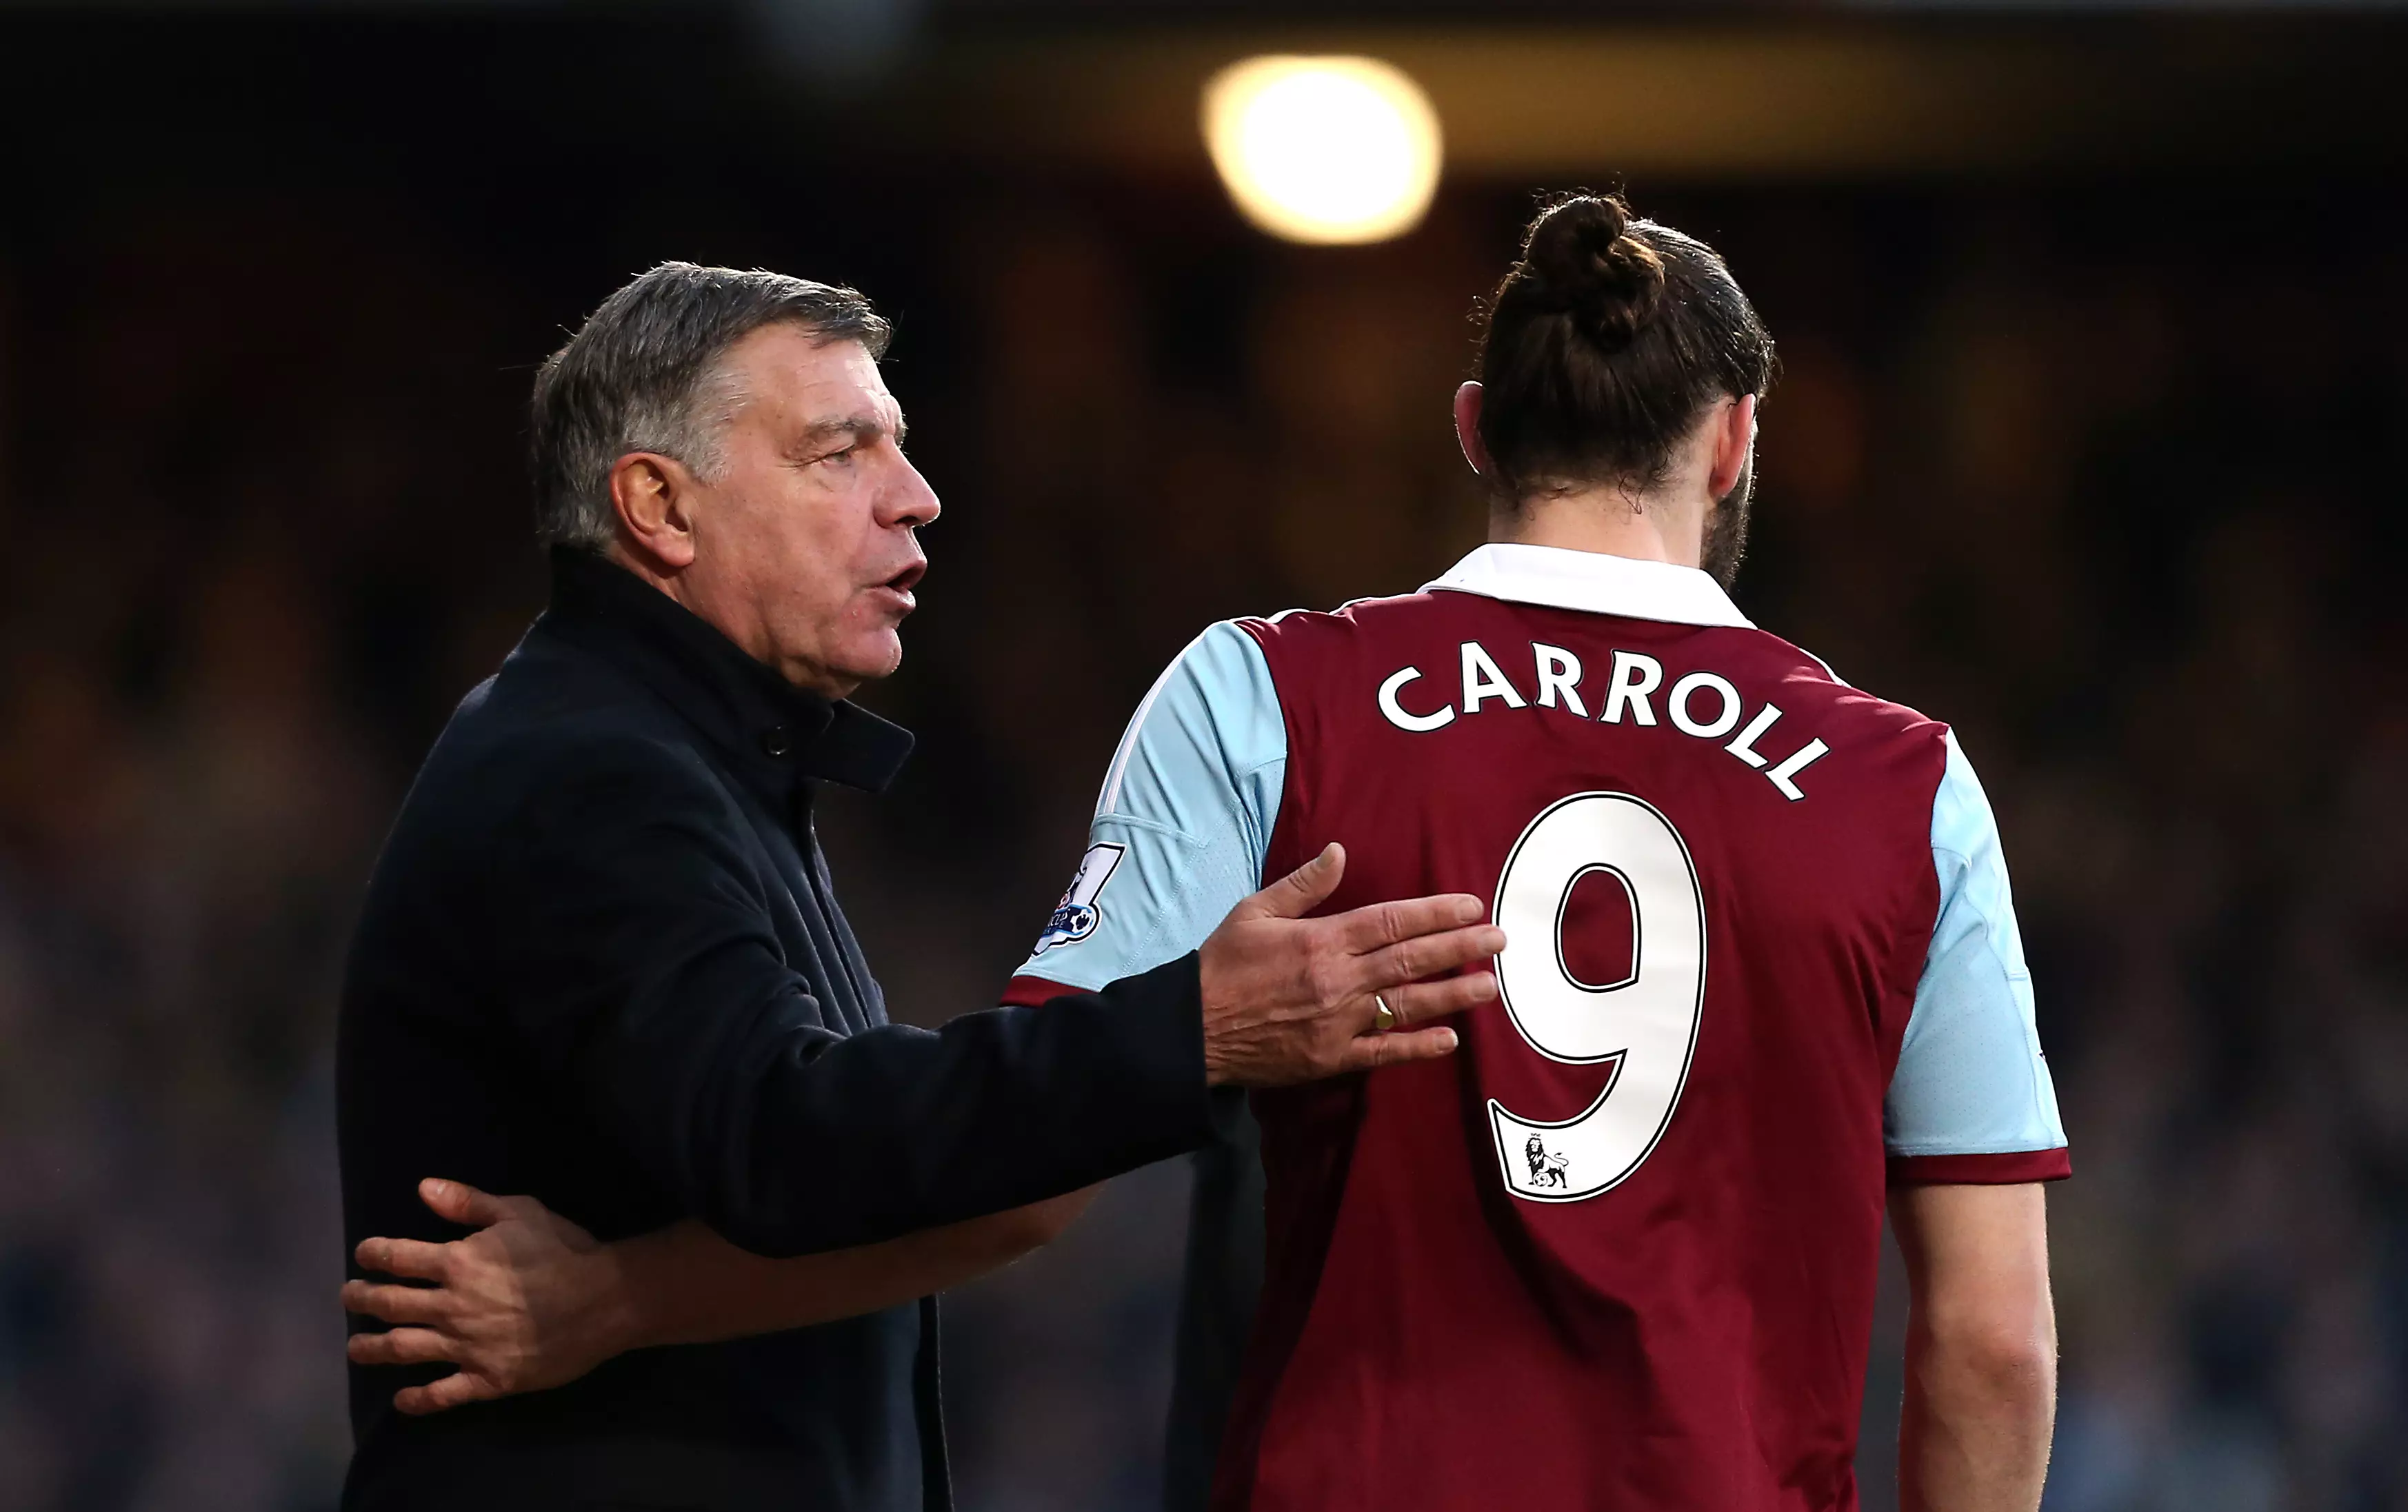 Allardyce and Carroll at West Ham together. Image: PA Images